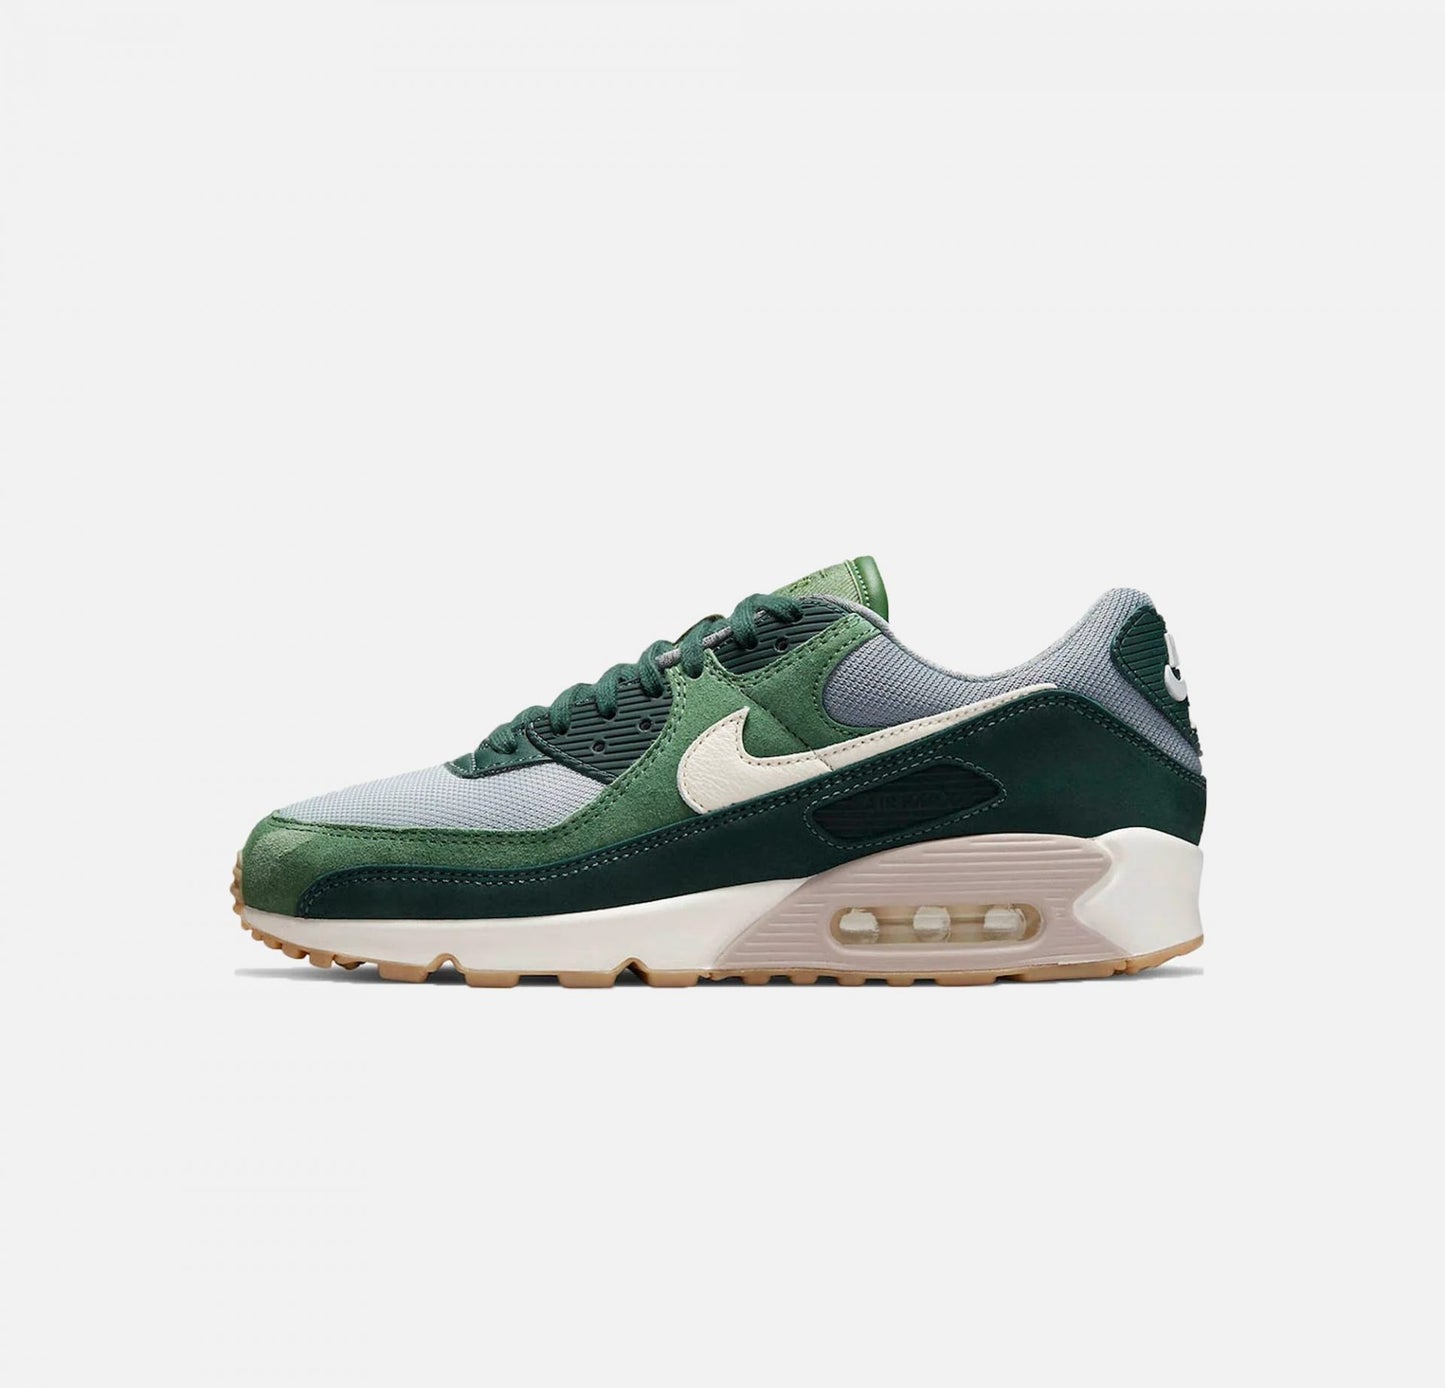 AIR MAX 90 ' PRO GREEN / PALE IVORY '